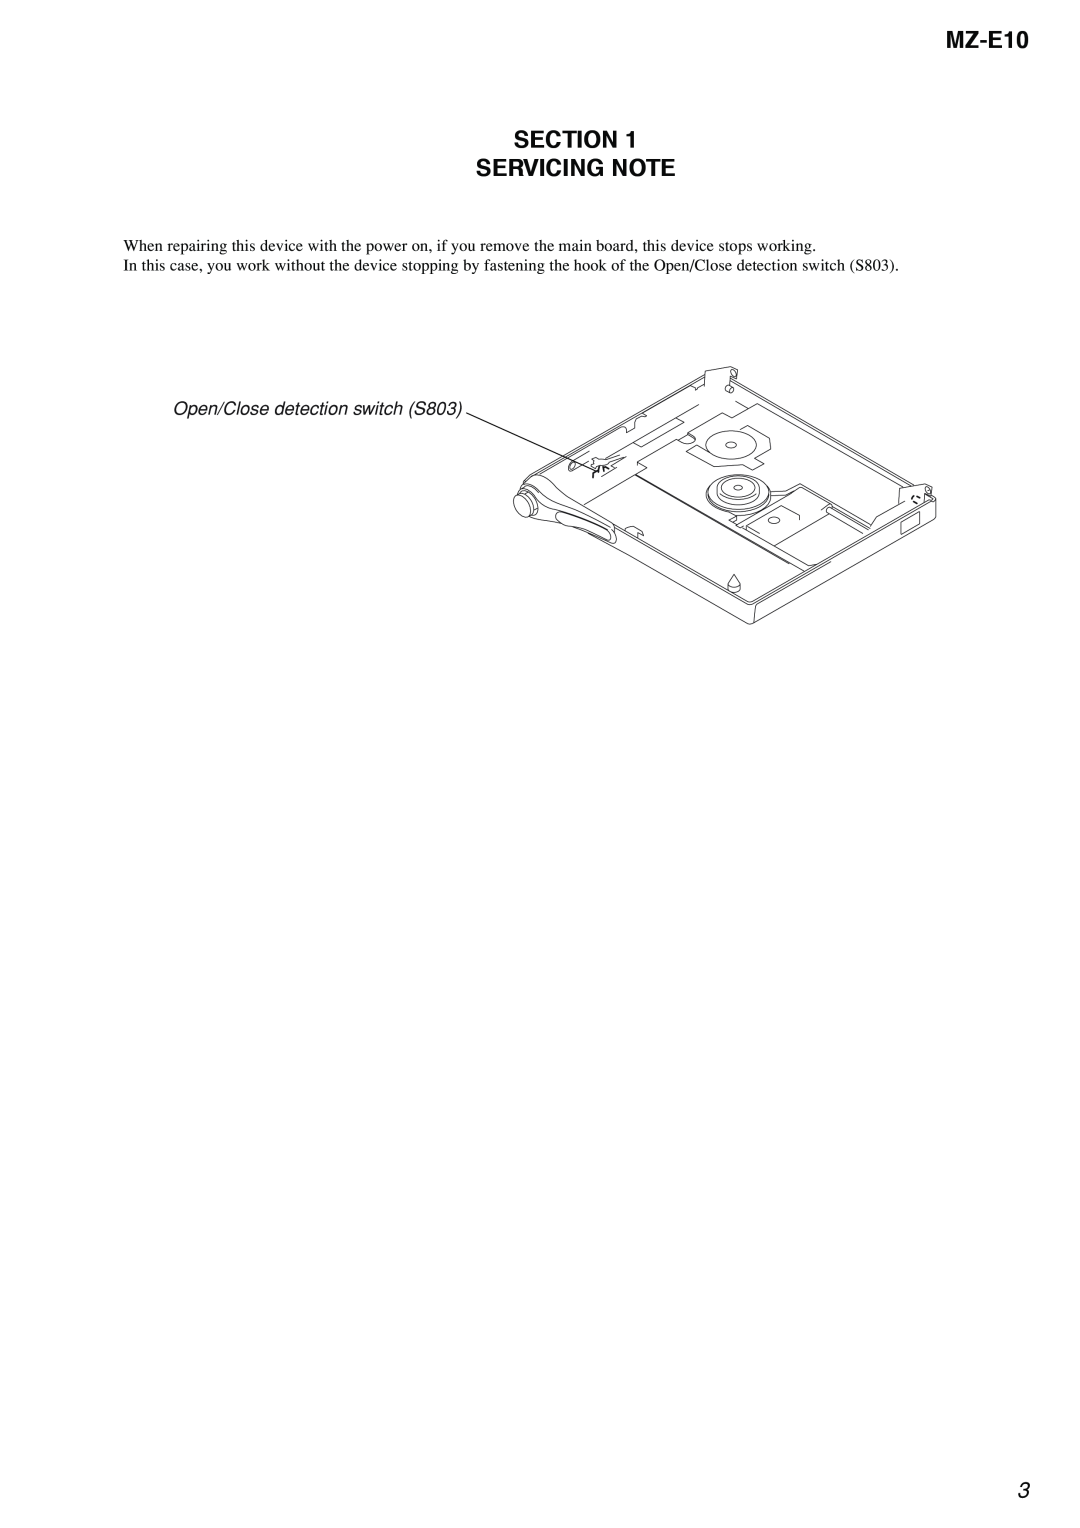 Sony service manual MZ-E10 SECTION SERVICING NOTE, Open/Close detection switch S803 